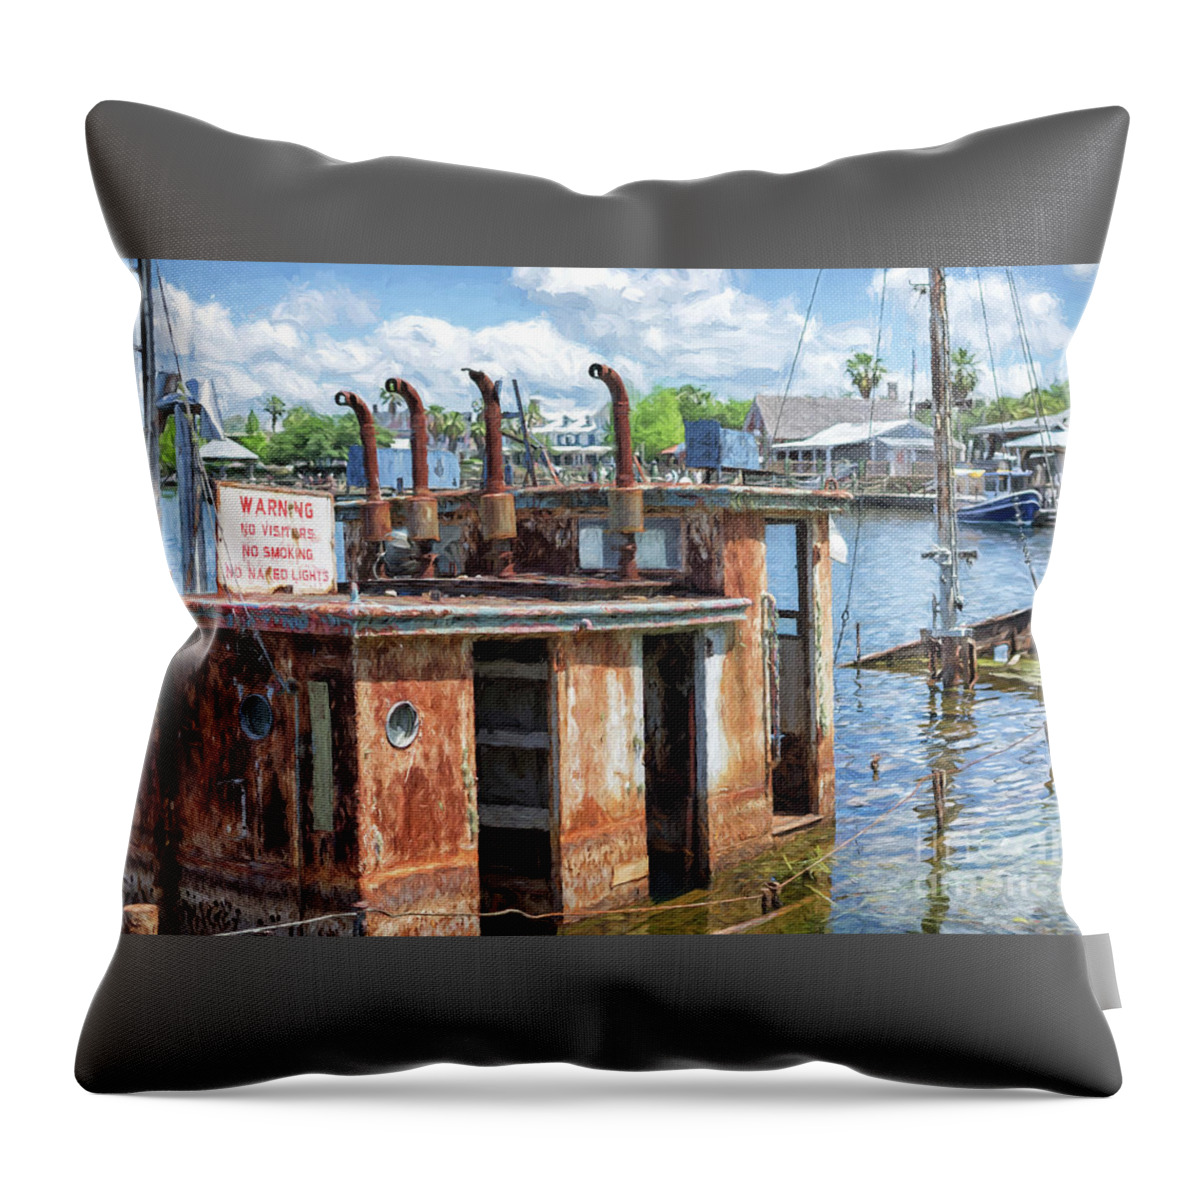 The Villages Throw Pillow featuring the photograph The Sunken Tugboat Fine Art Photography - Digital Painting by Mary Lou Chmura by Mary Lou Chmura